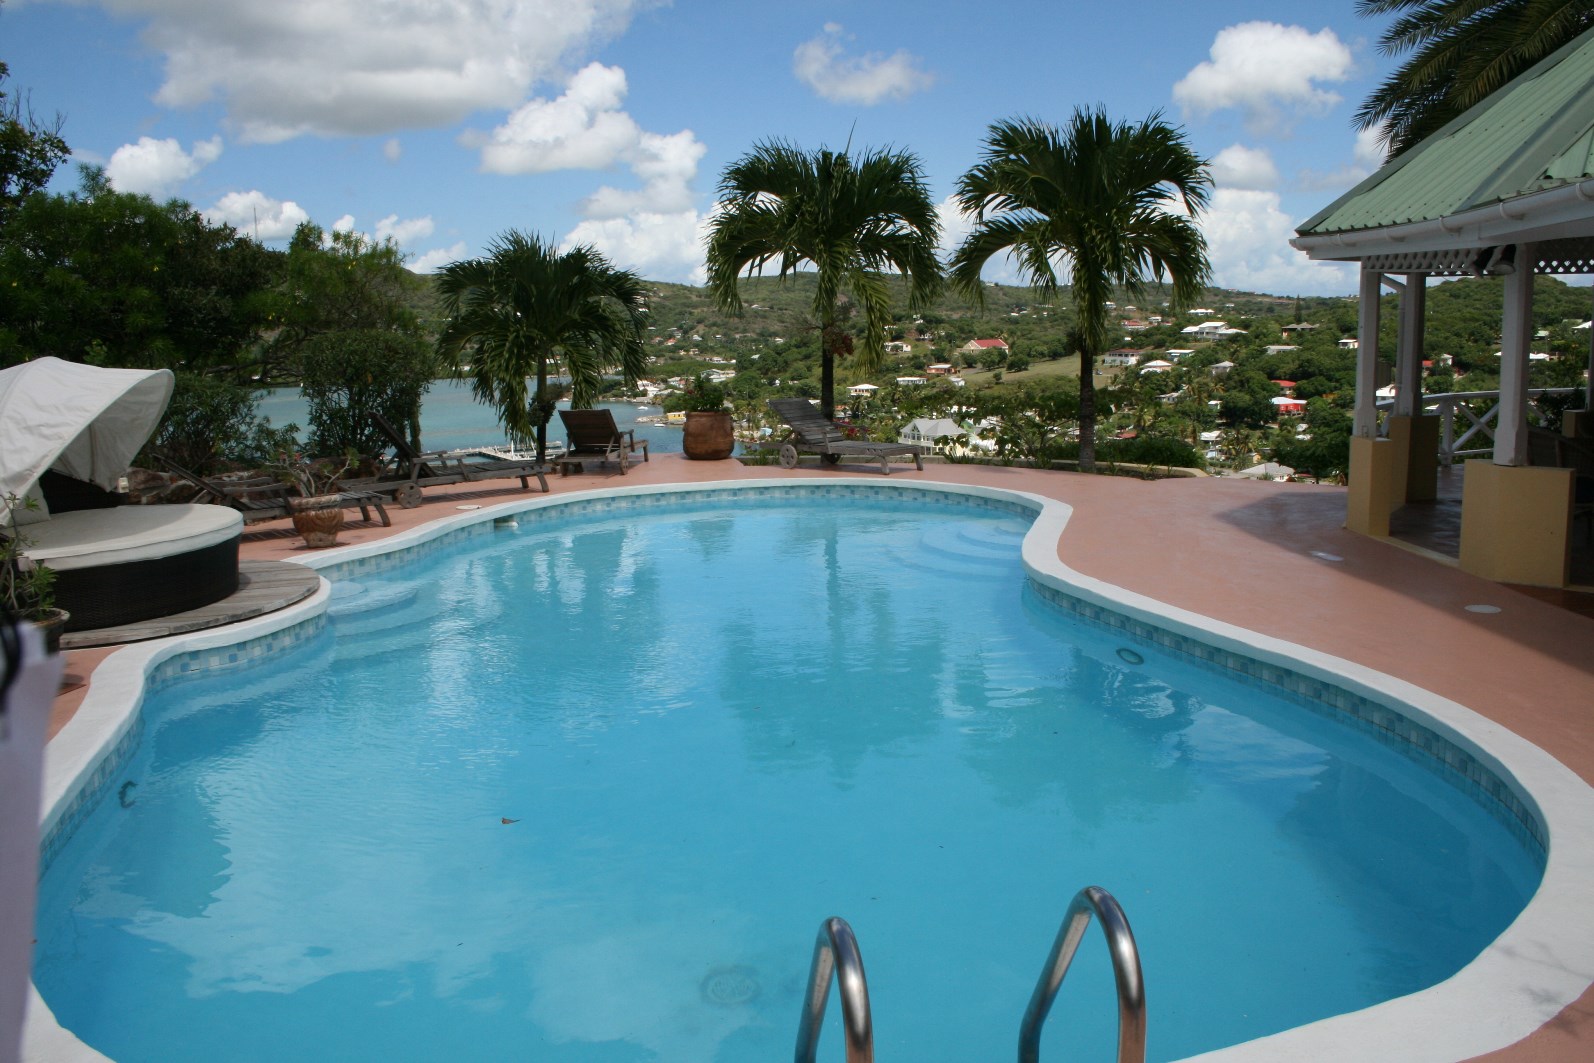 Swimming pool at Harbour Hill, Antigua